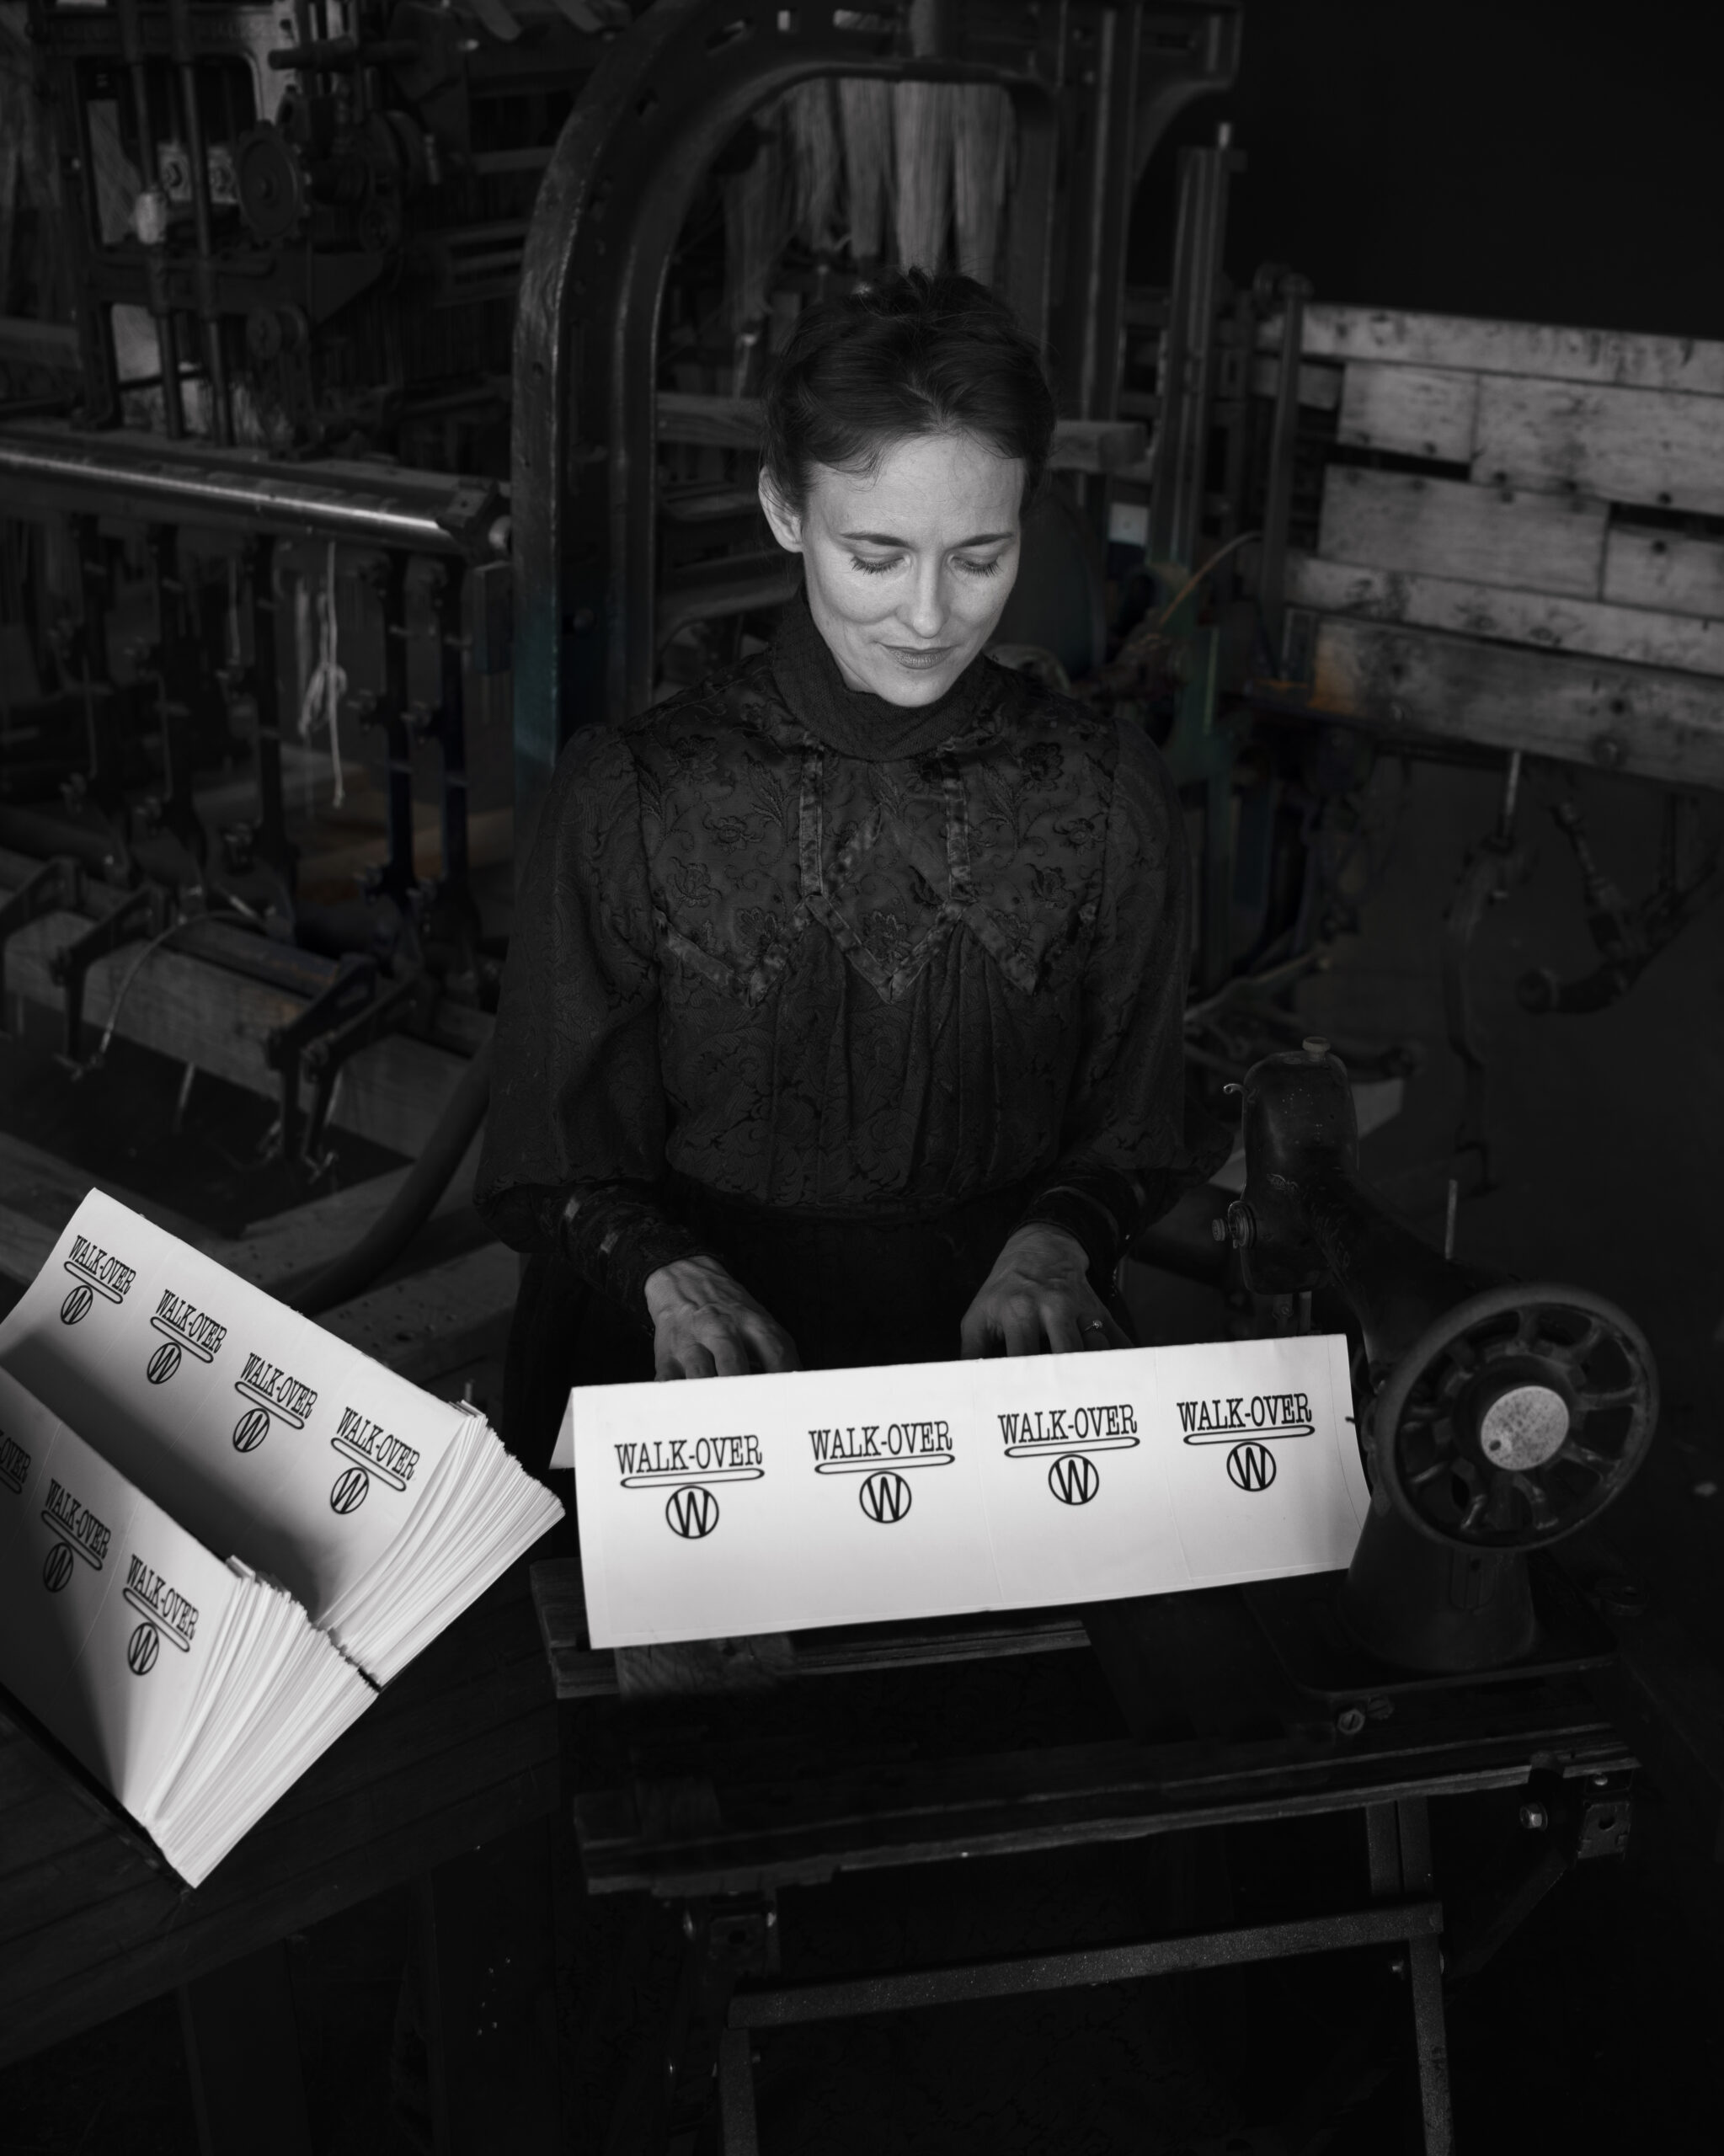 black and white photo of a woman in turn of the century attire in front of an industrial loom.